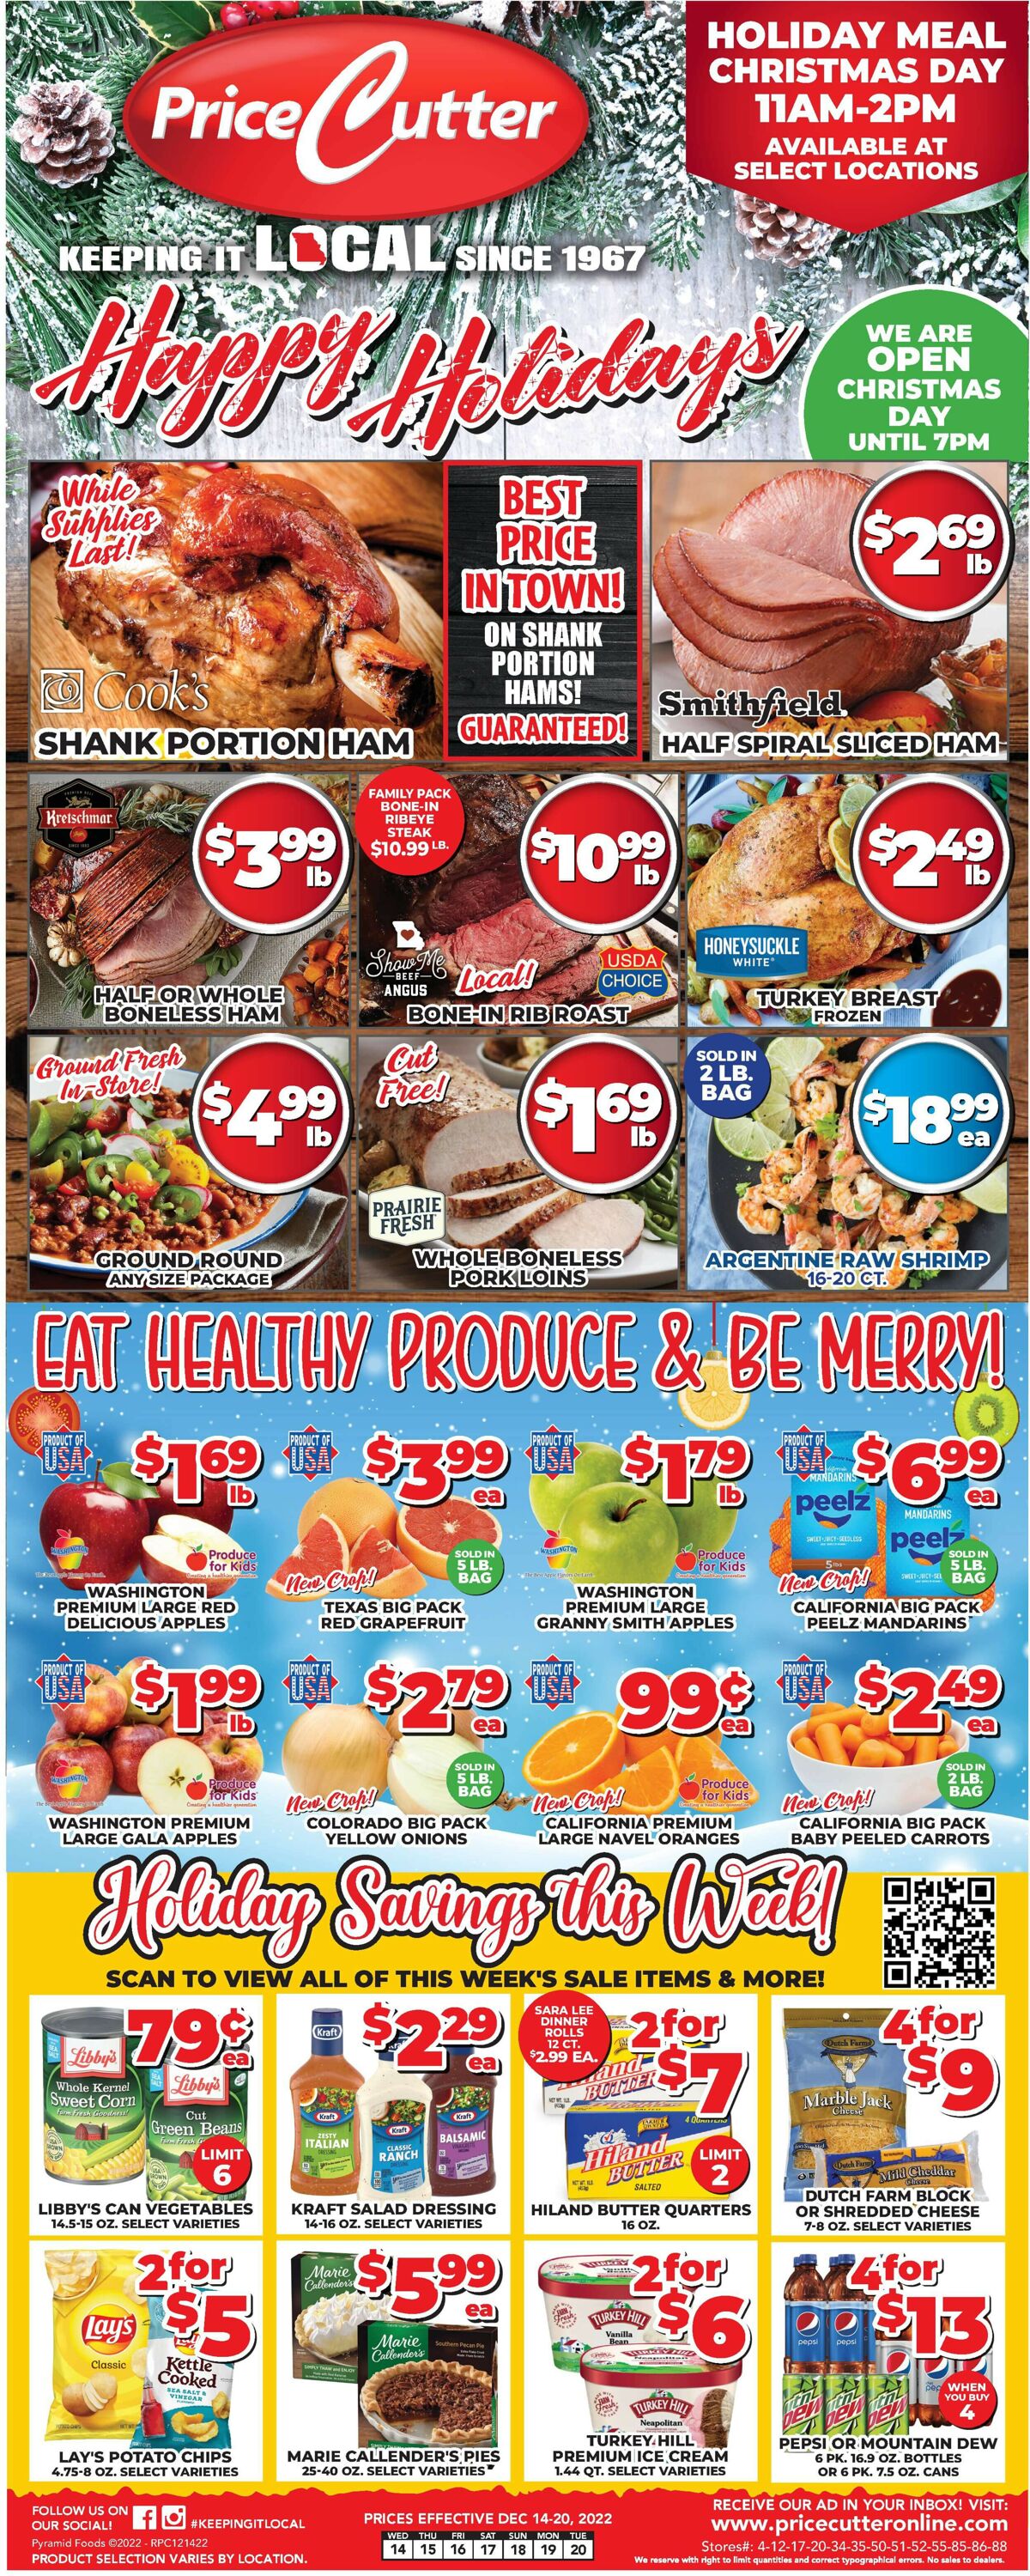 Price Cutter Weekly Ad Circular - valid 12/14-12/20/2022